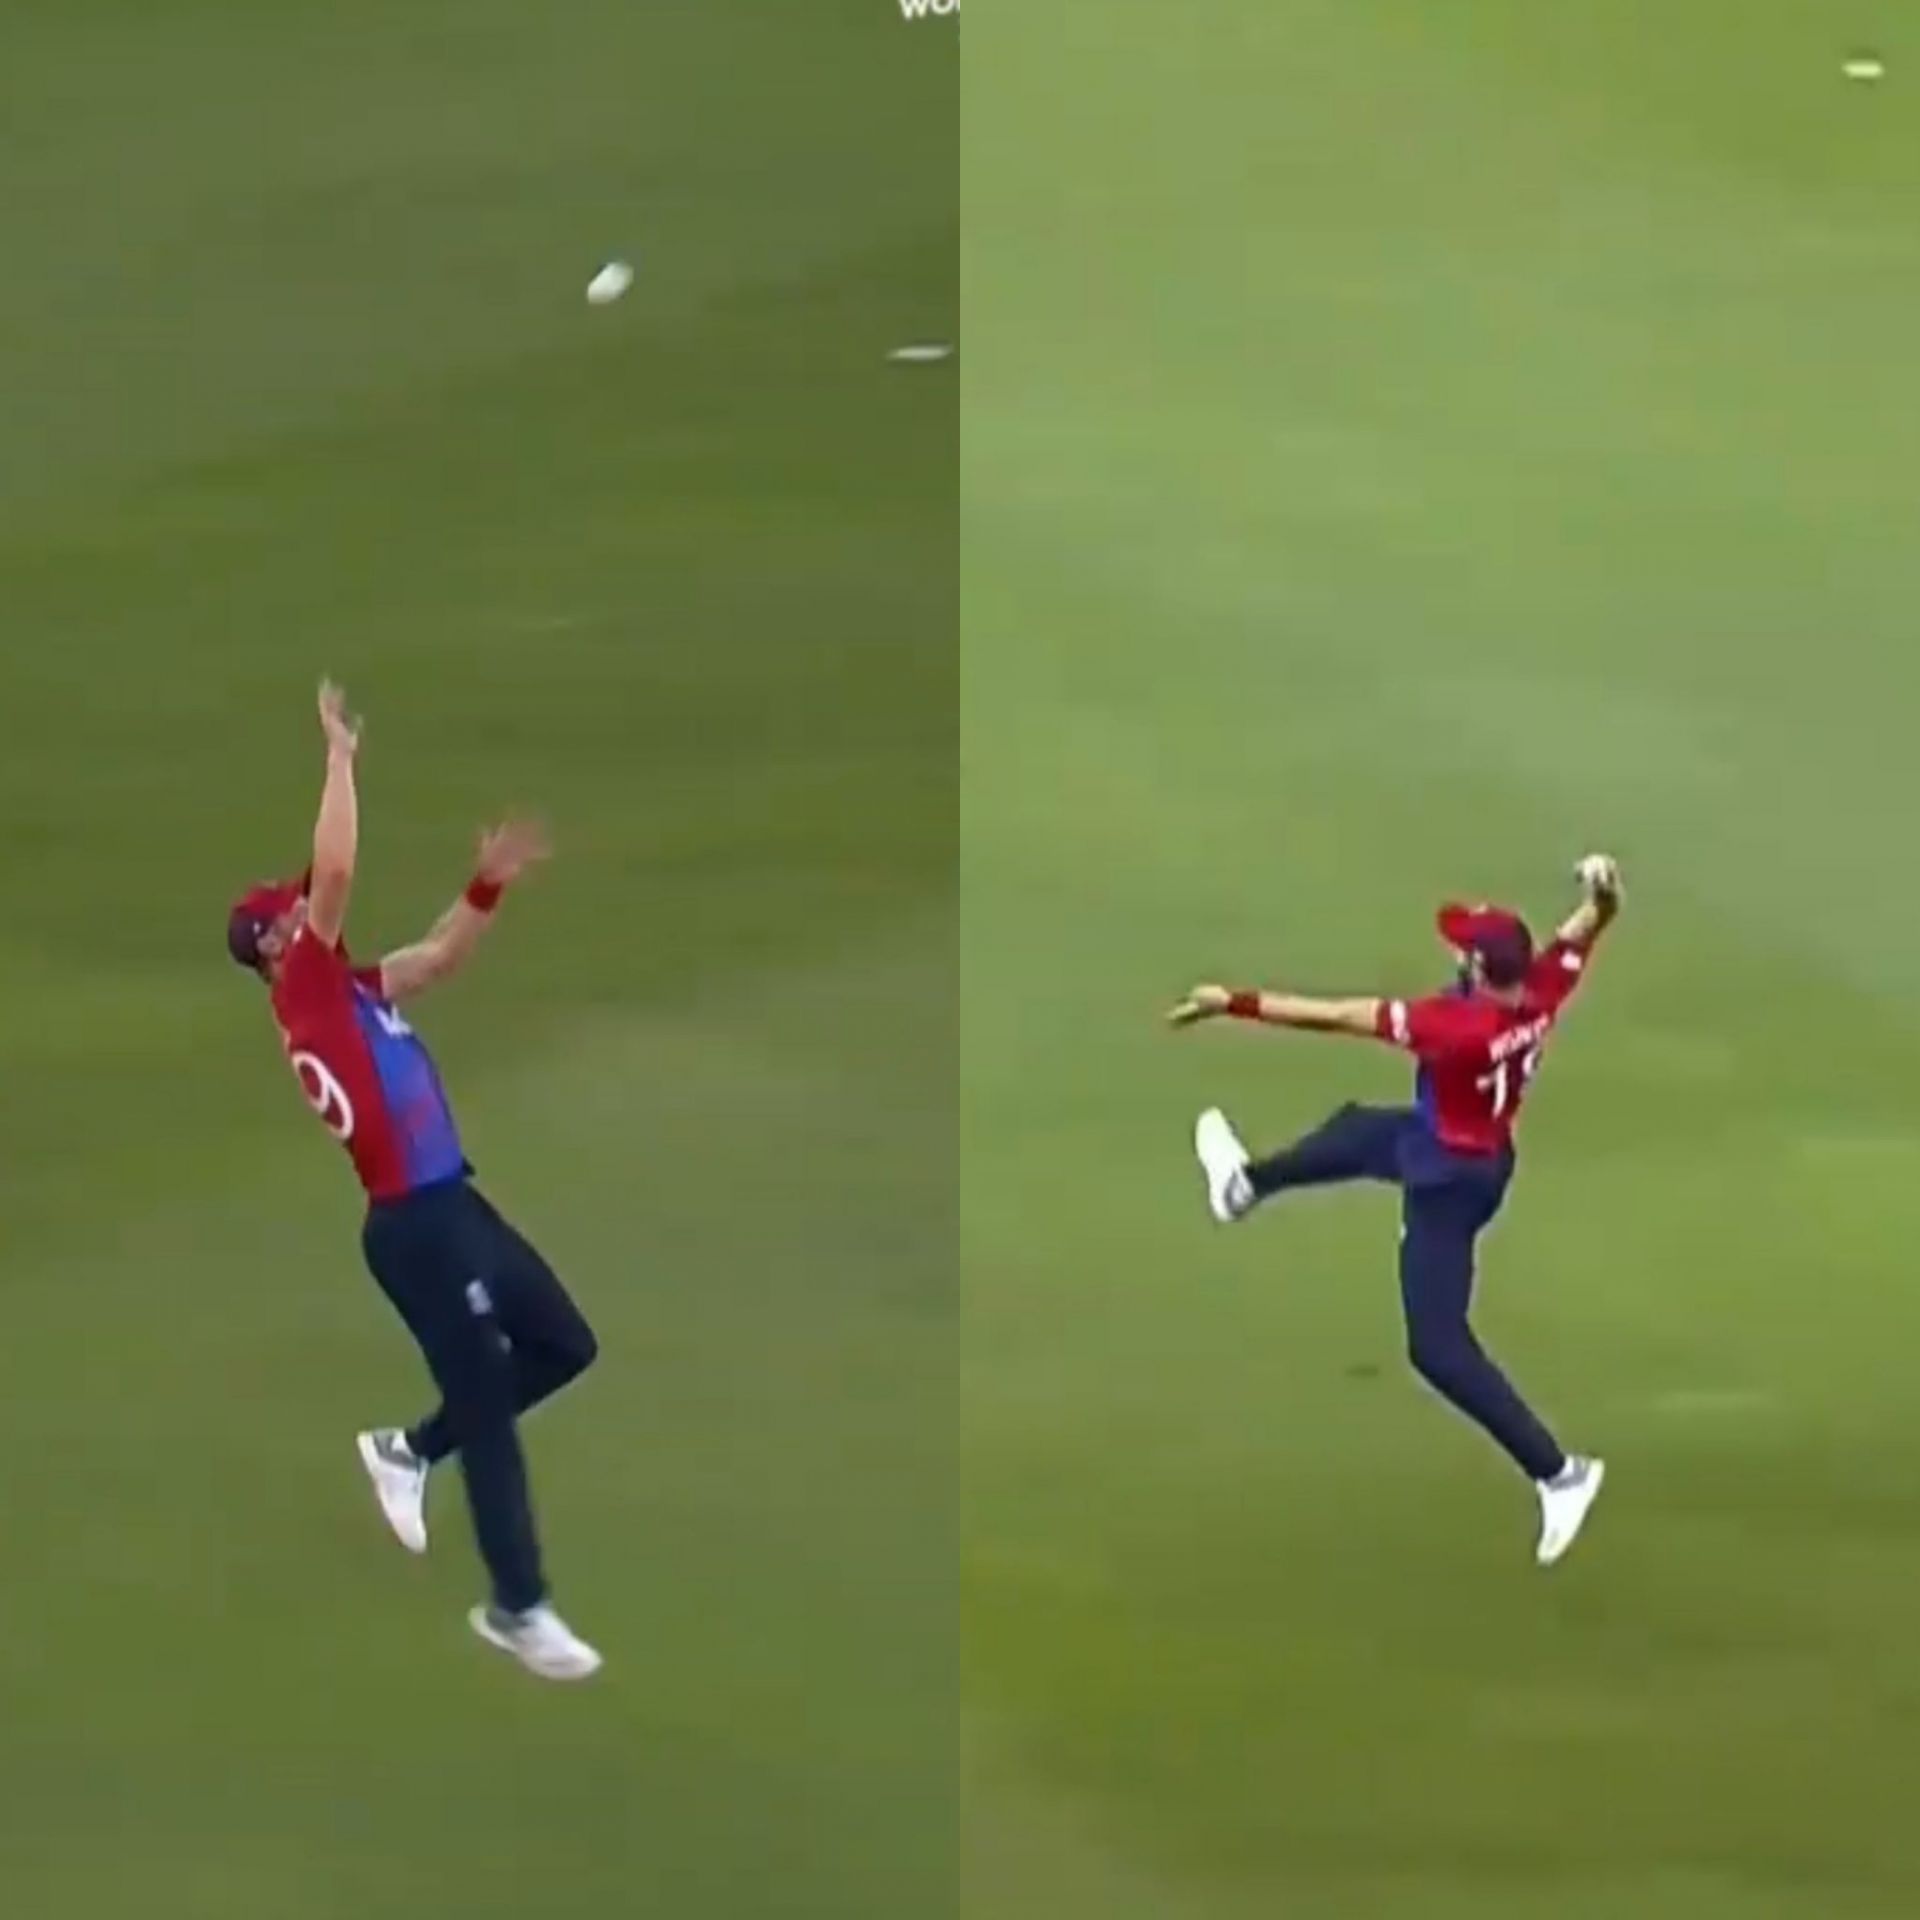 Chris Woakes takes a magnificent catch at mid-on.